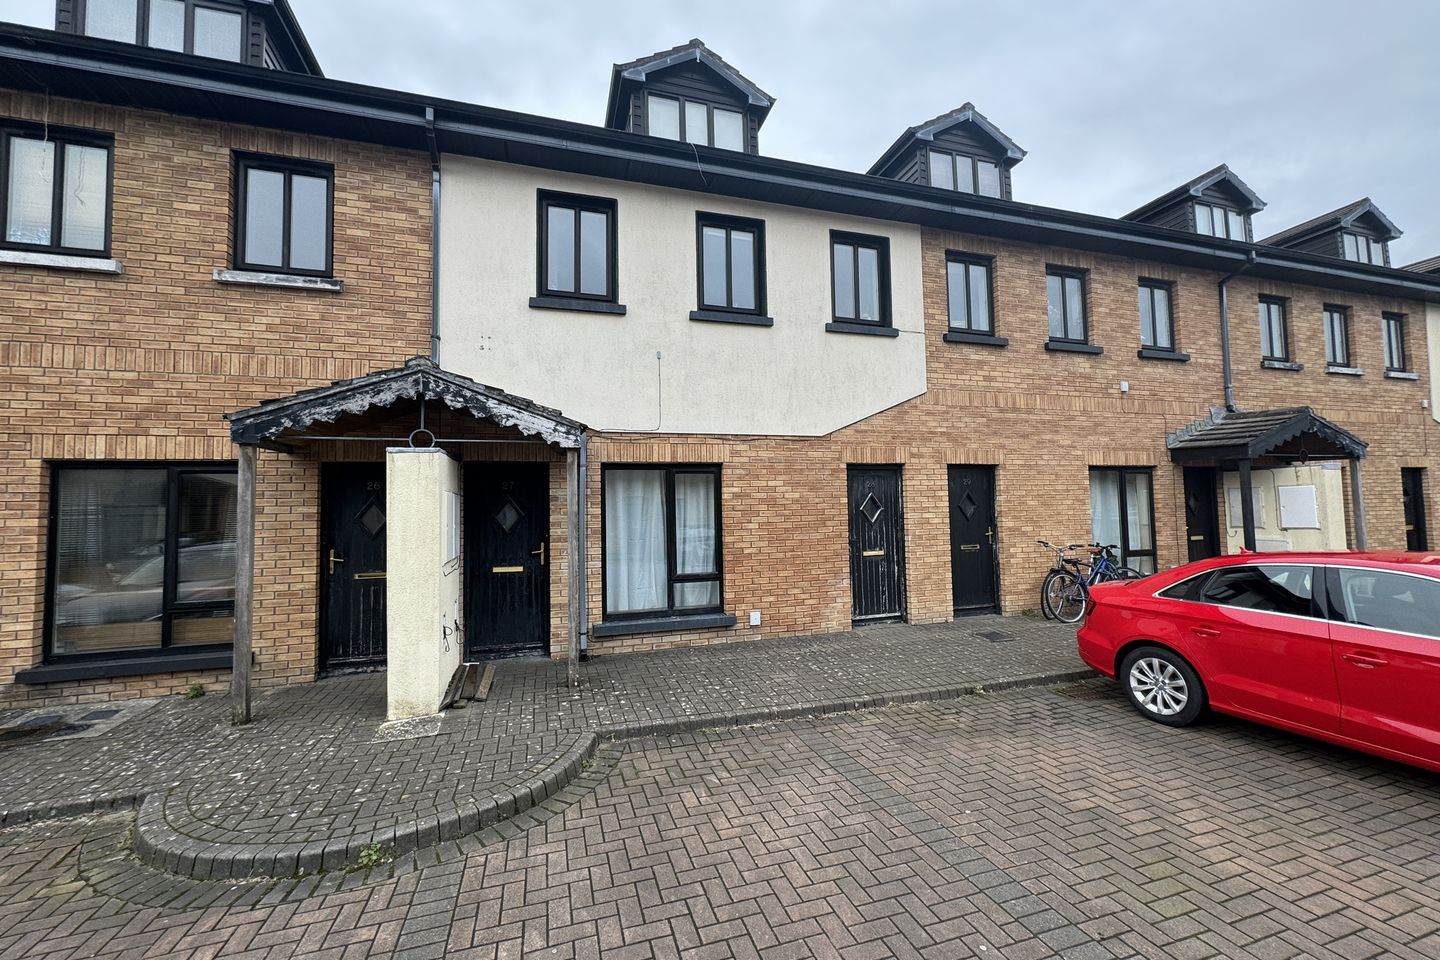 28 Mullán Mór, Tuam Road, Galway City, Co. Galway, H91EPE8